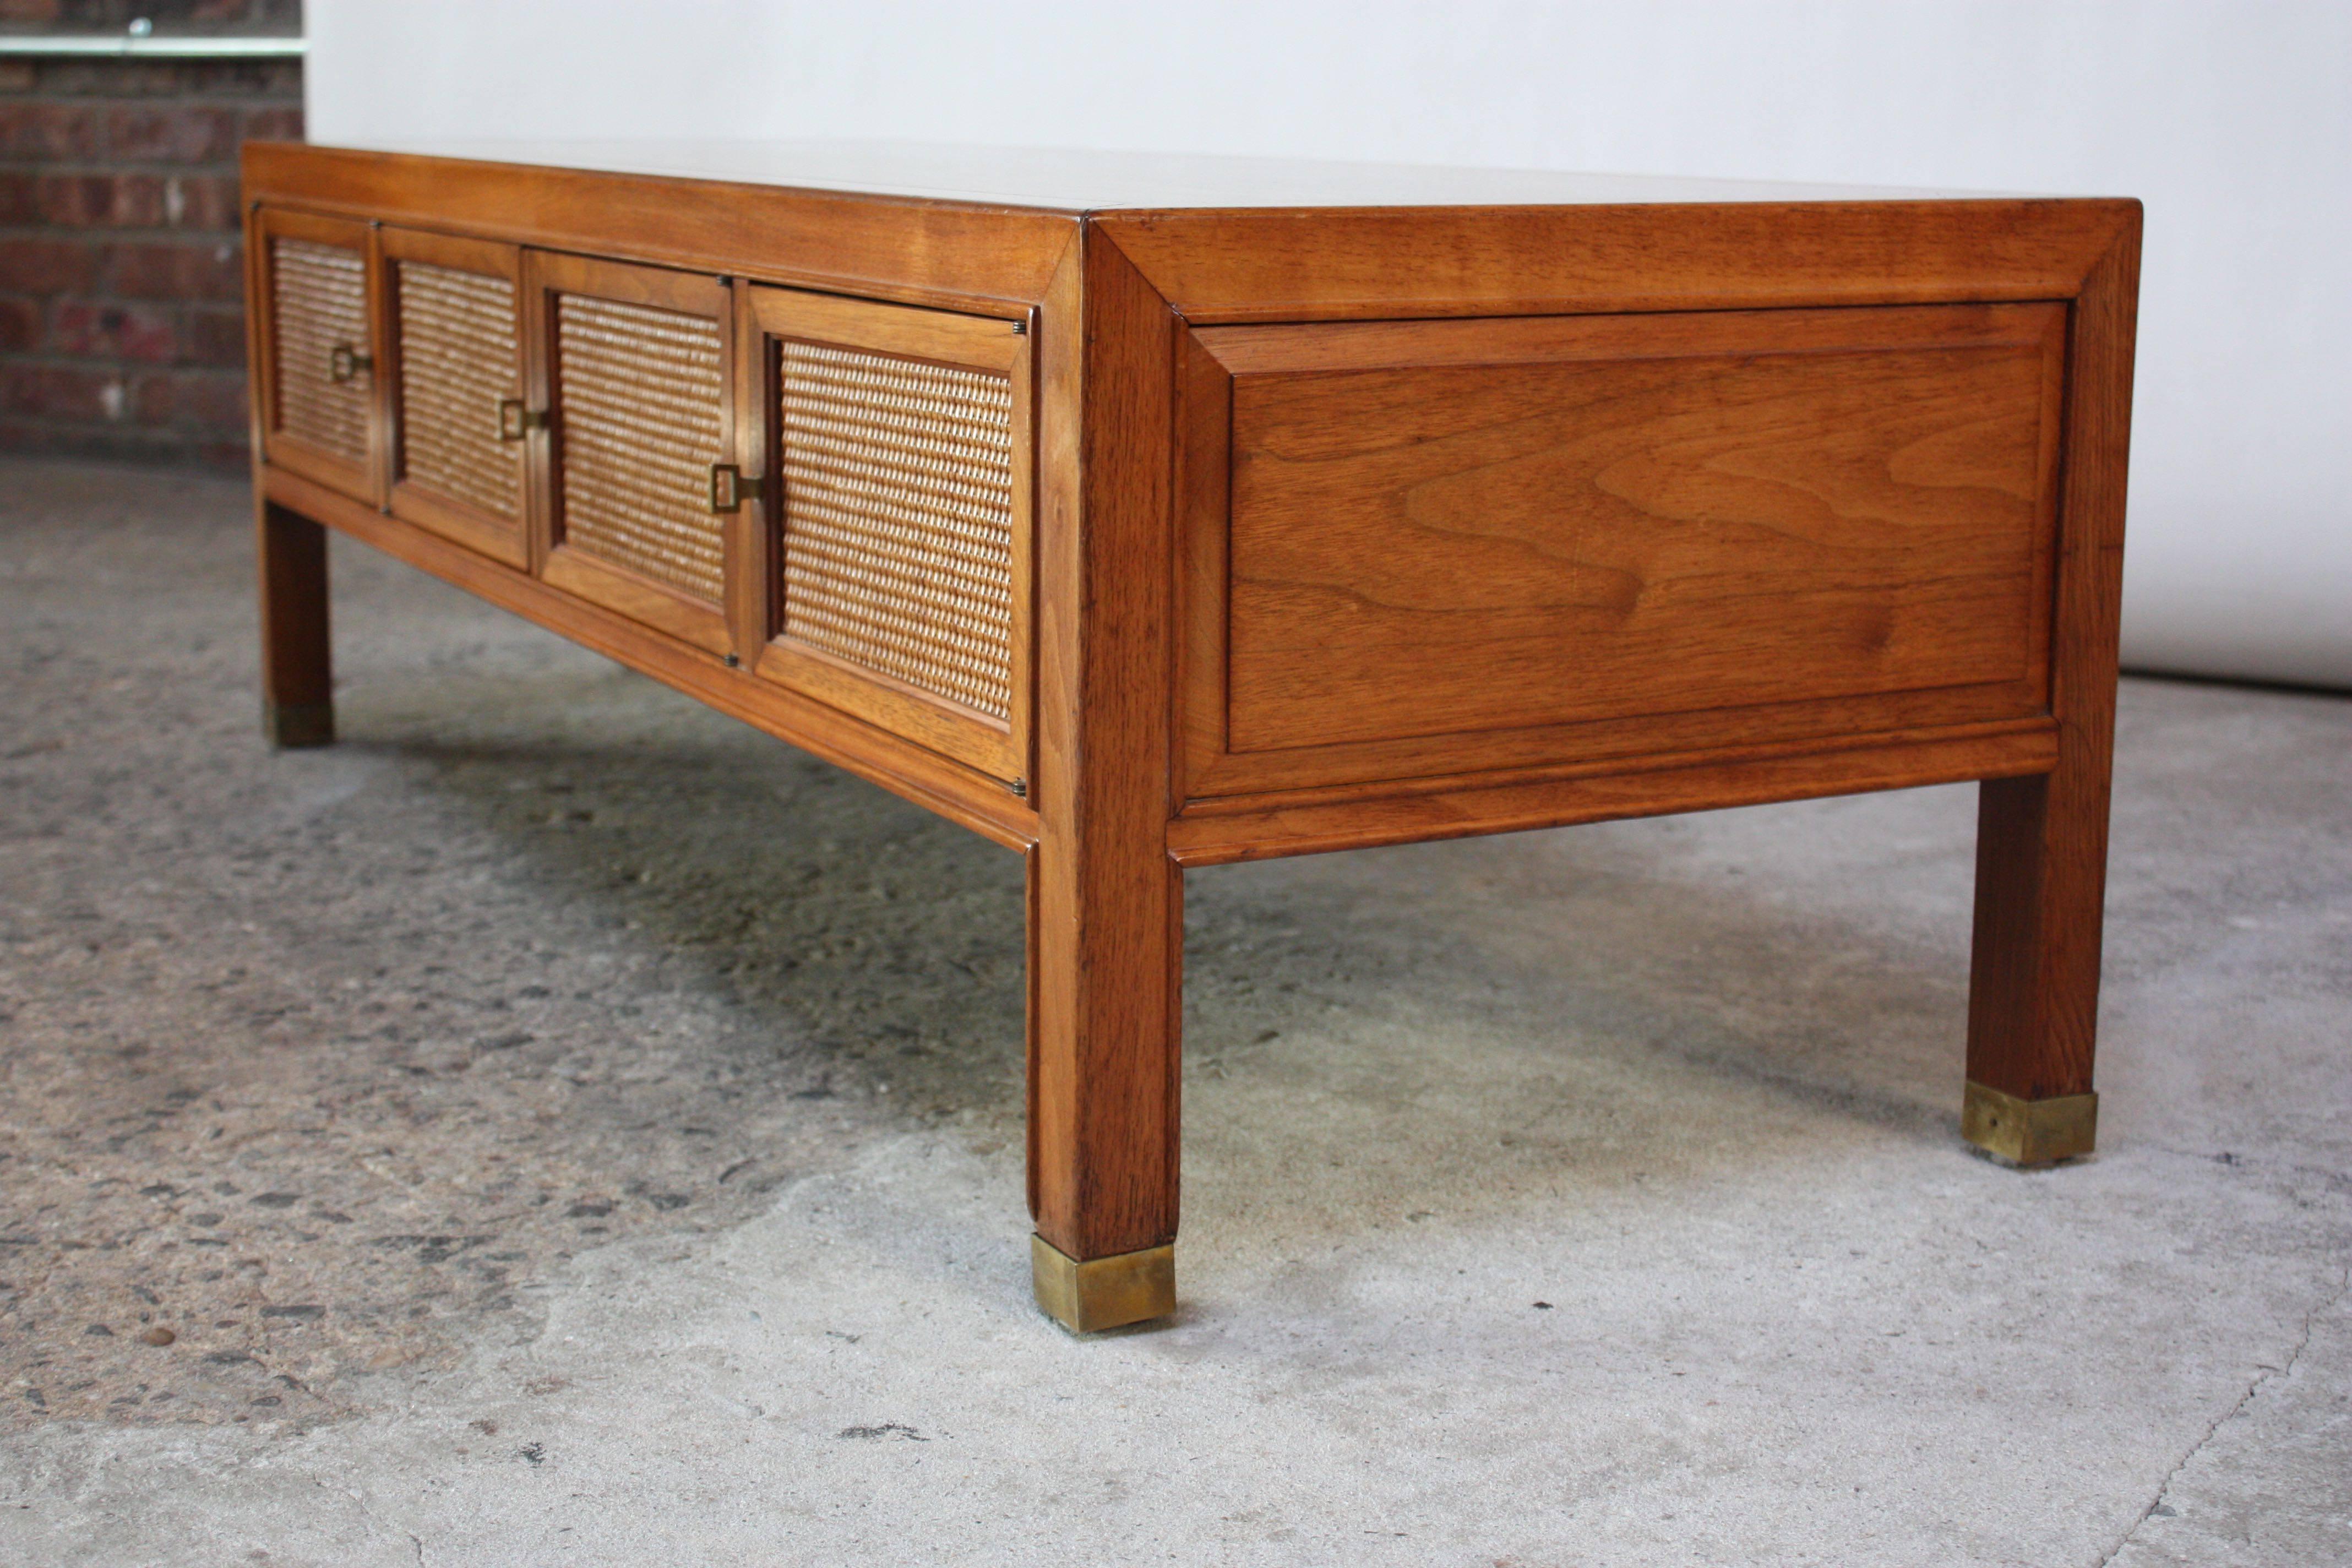 This 1960s low coffee table was designed and manufactured by Drexel for the Heritage Line.
It features four cane-front doors that all open to reveal a shared storage. Patinated brass capped feet and cabinet pulls. Finished on all sides, the back